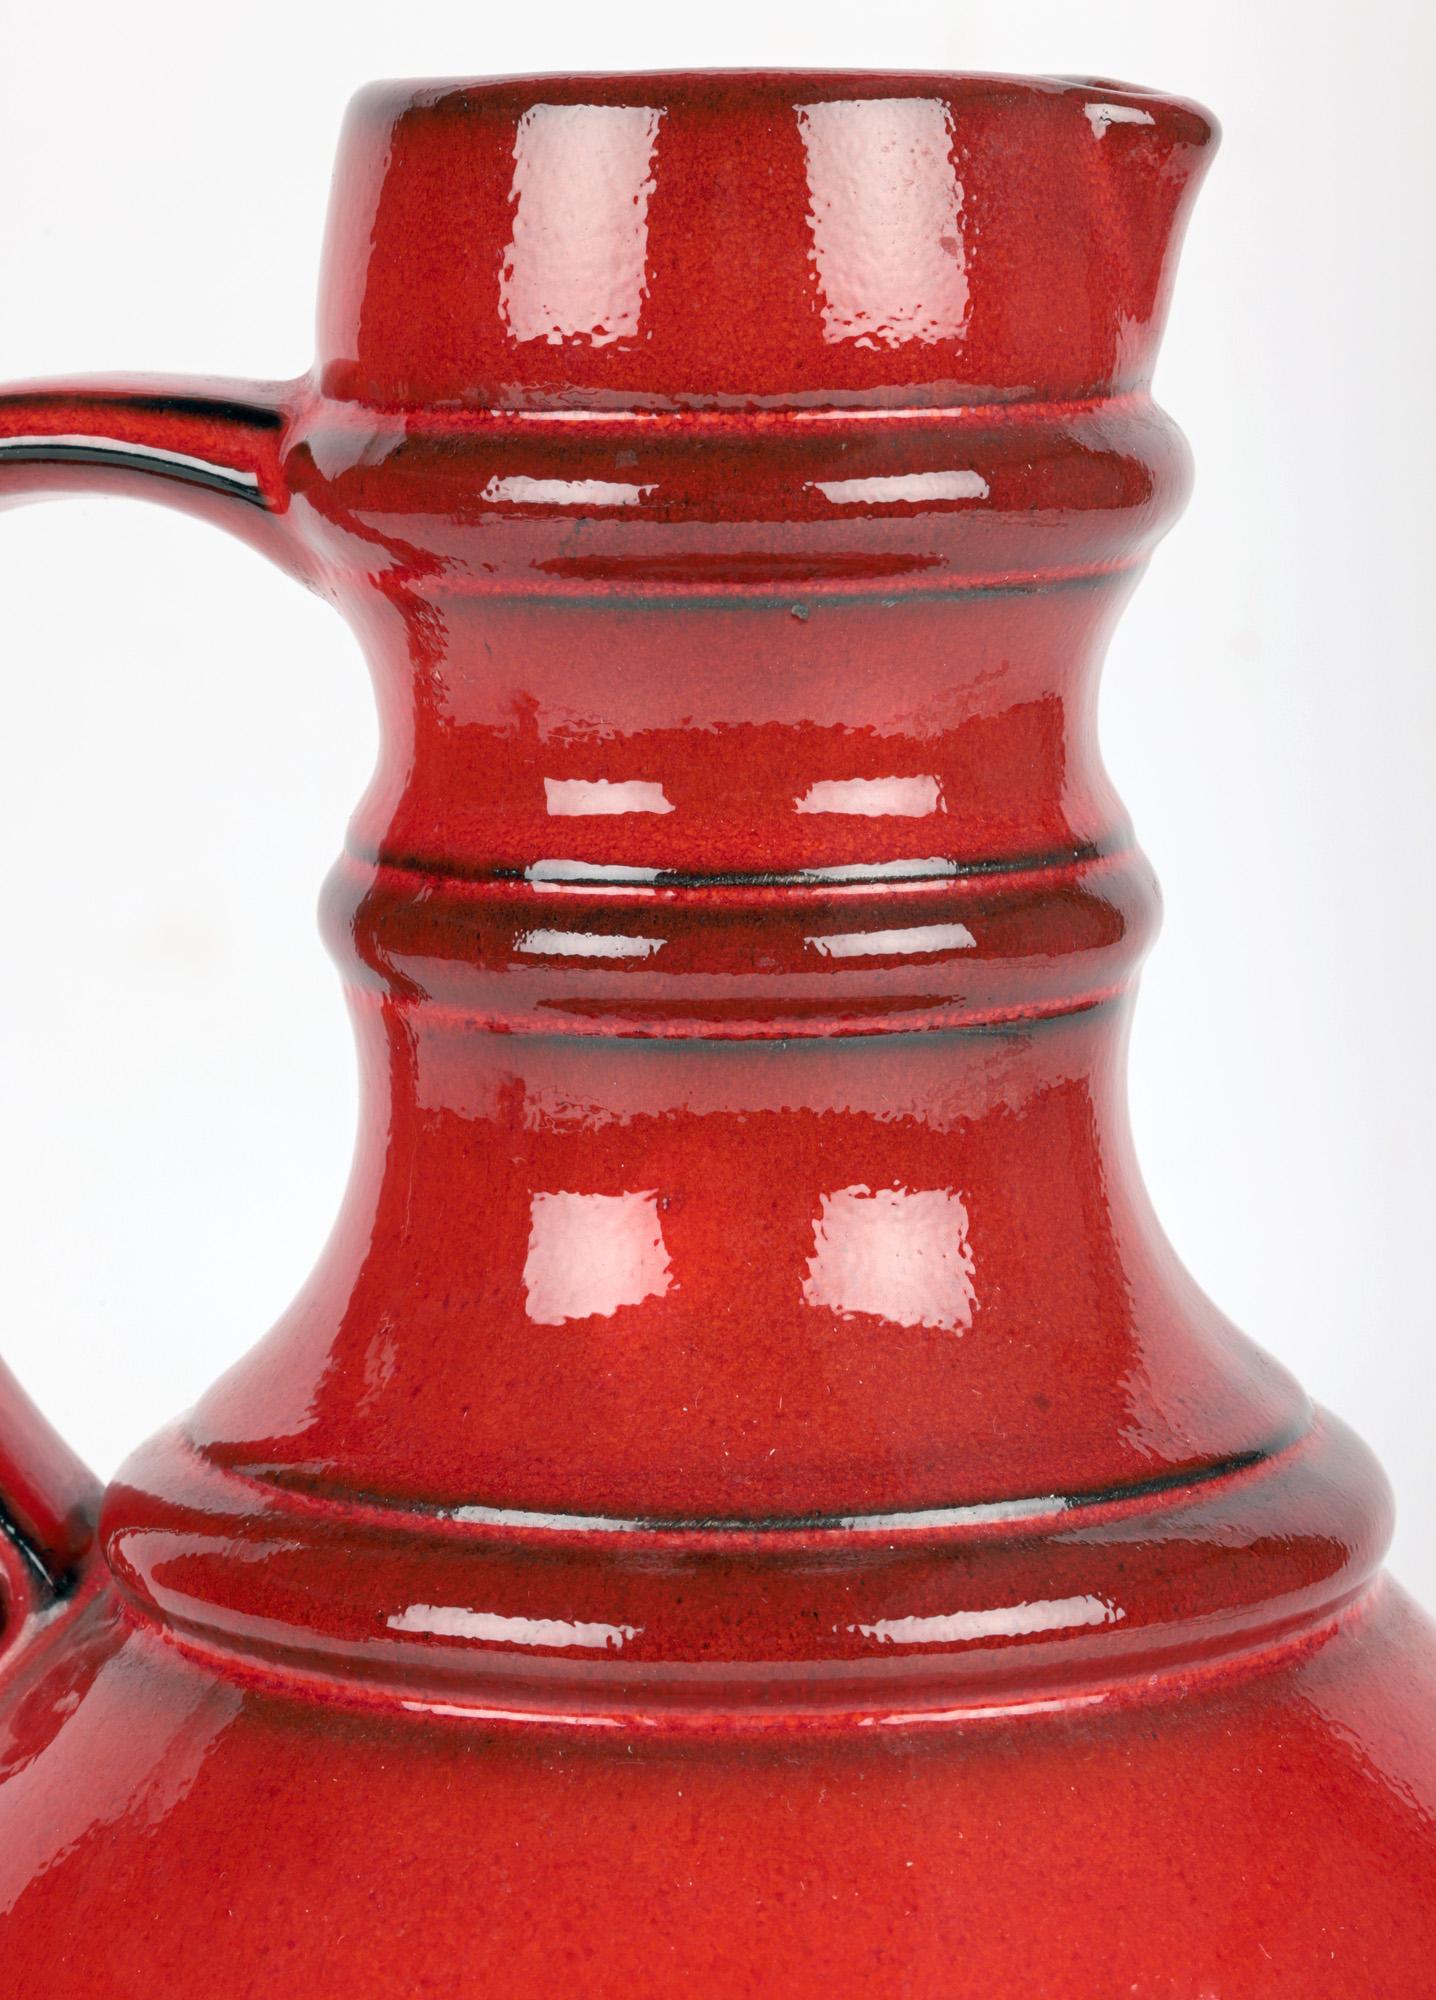 An exceptional West-German mid-century art pottery red lava glazed pitcher vase dating from around 1950-60. The ceramic pitcher stands raised on a narrow round foot with a round bulbous body and shaped tall narrow three ring neck with a short funnel